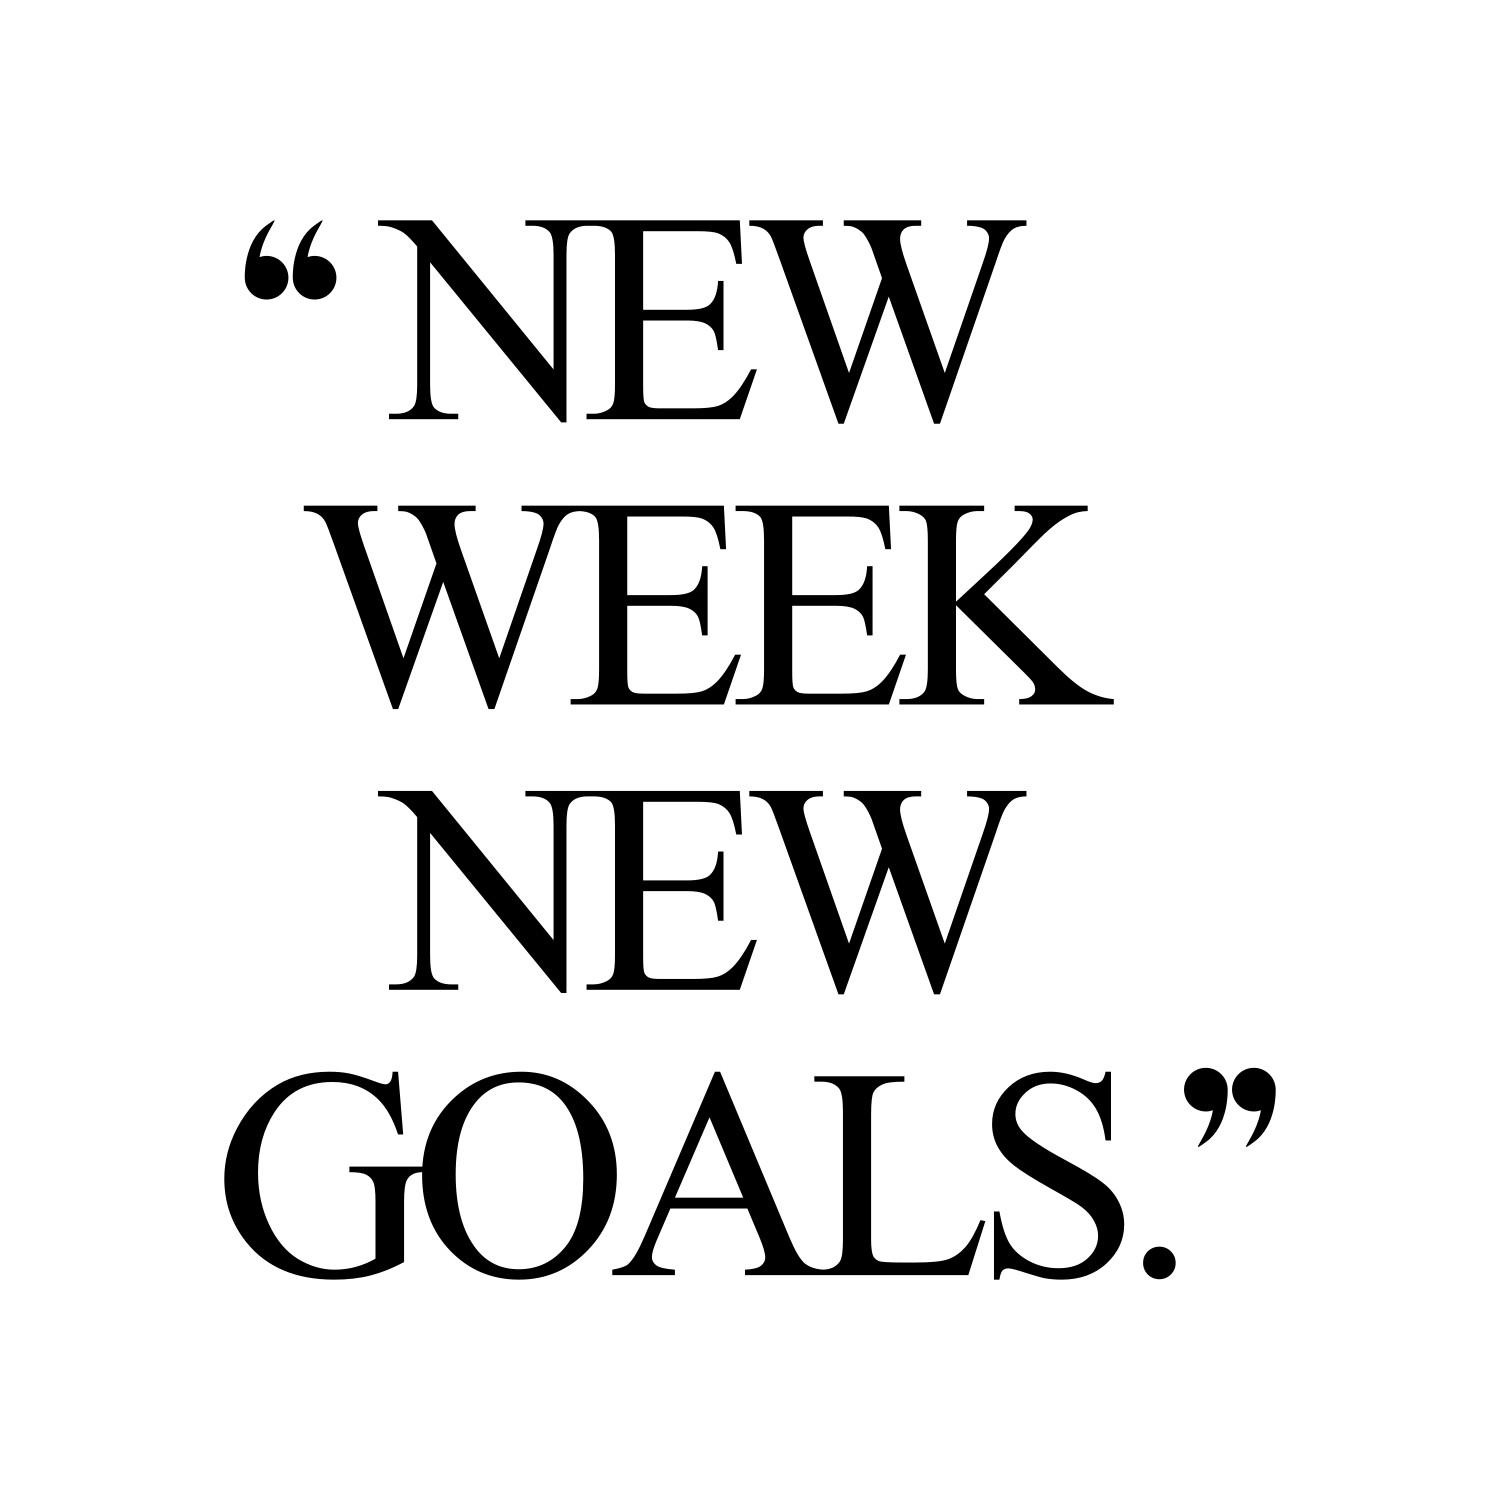 New week new goals! Browse our collection of inspirational health and weight loss quotes and get instant exercise and fitness motivation. Transform positive thoughts into positive actions and get fit, healthy and happy! https://www.spotebi.com/workout-motivation/new-week-new-goals/